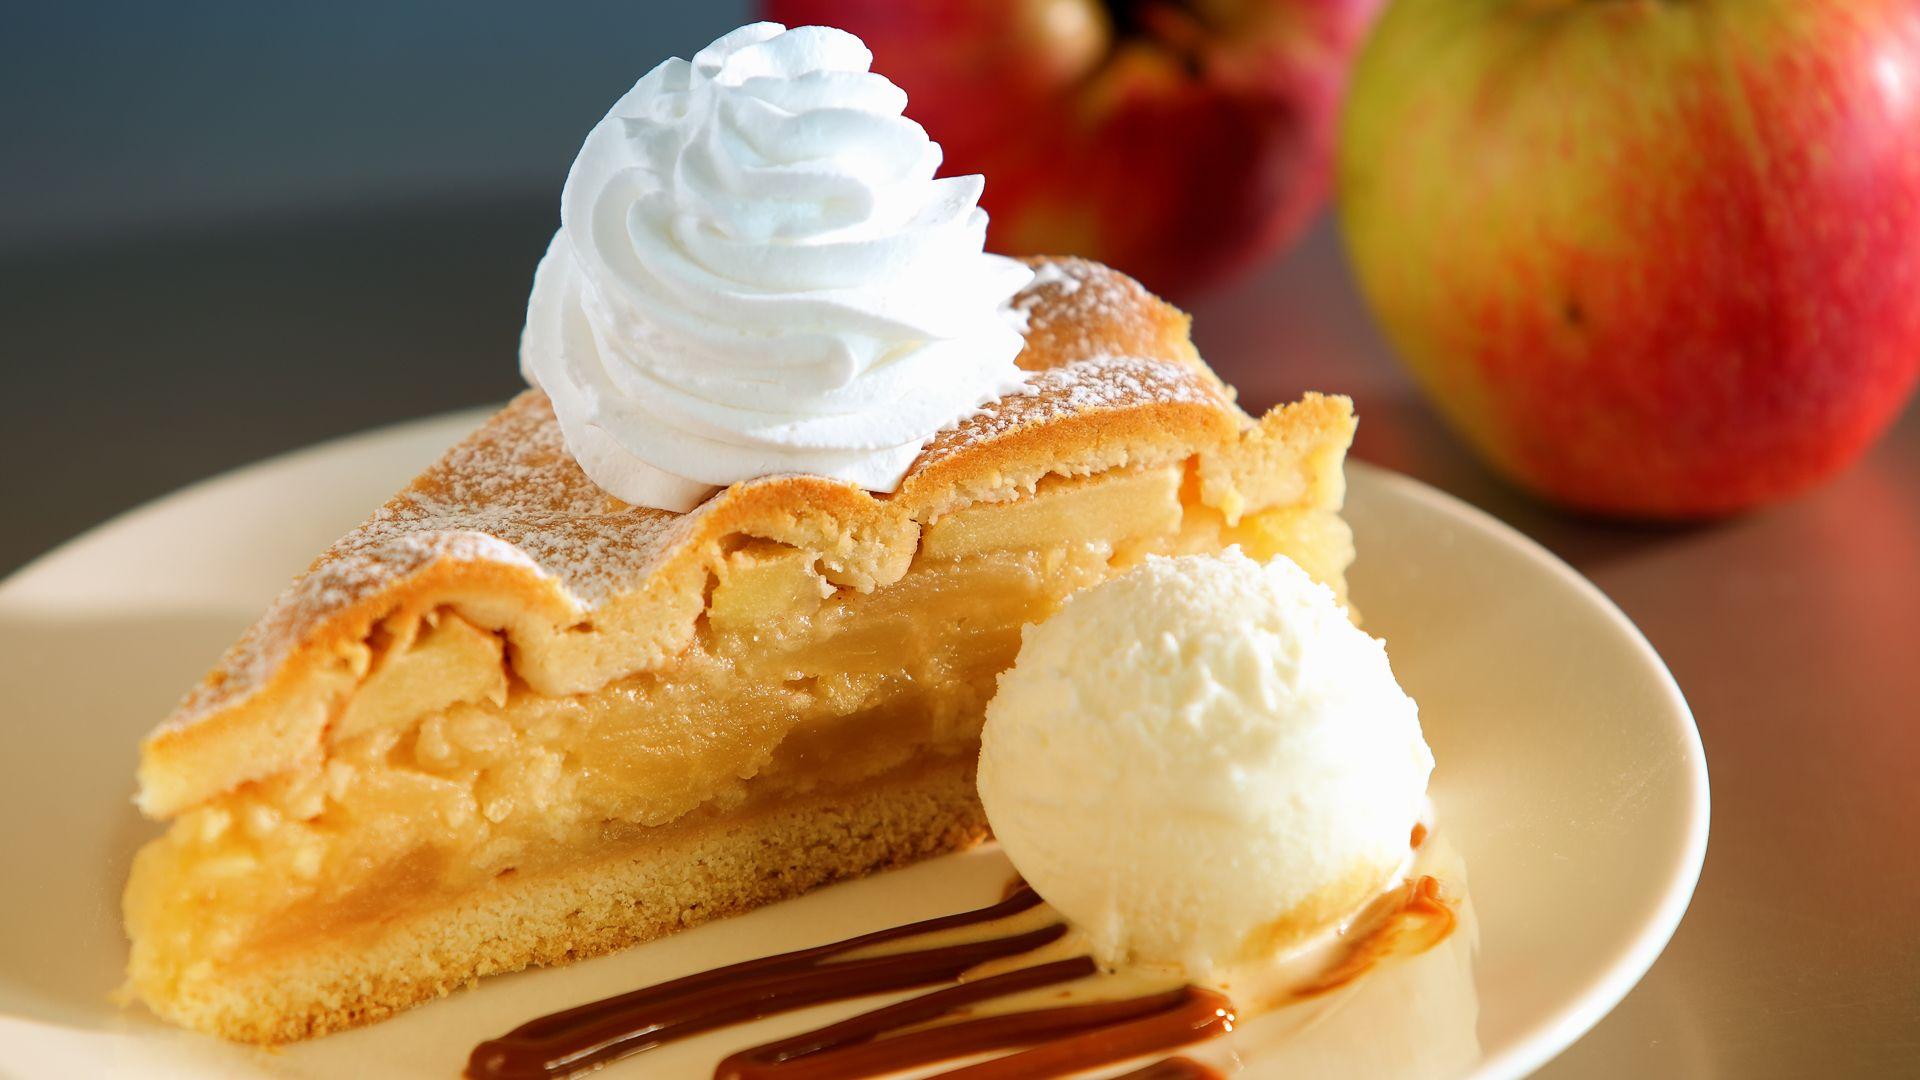 Get Your Apple Fix With 7 Cheap Pie Recipe Twists